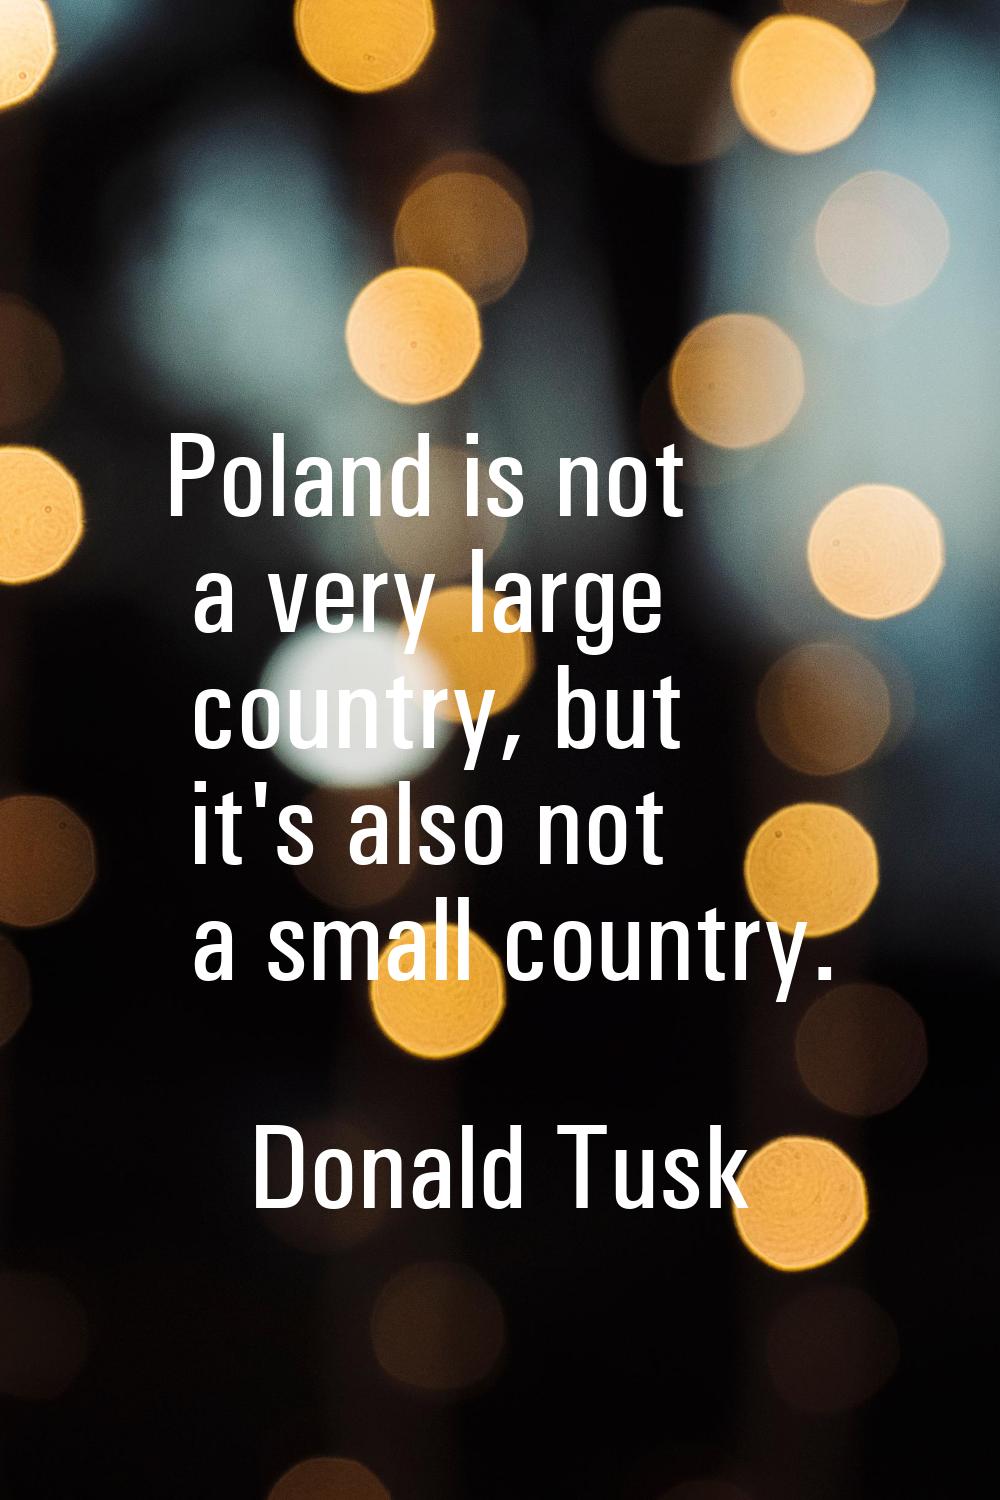 Poland is not a very large country, but it's also not a small country.